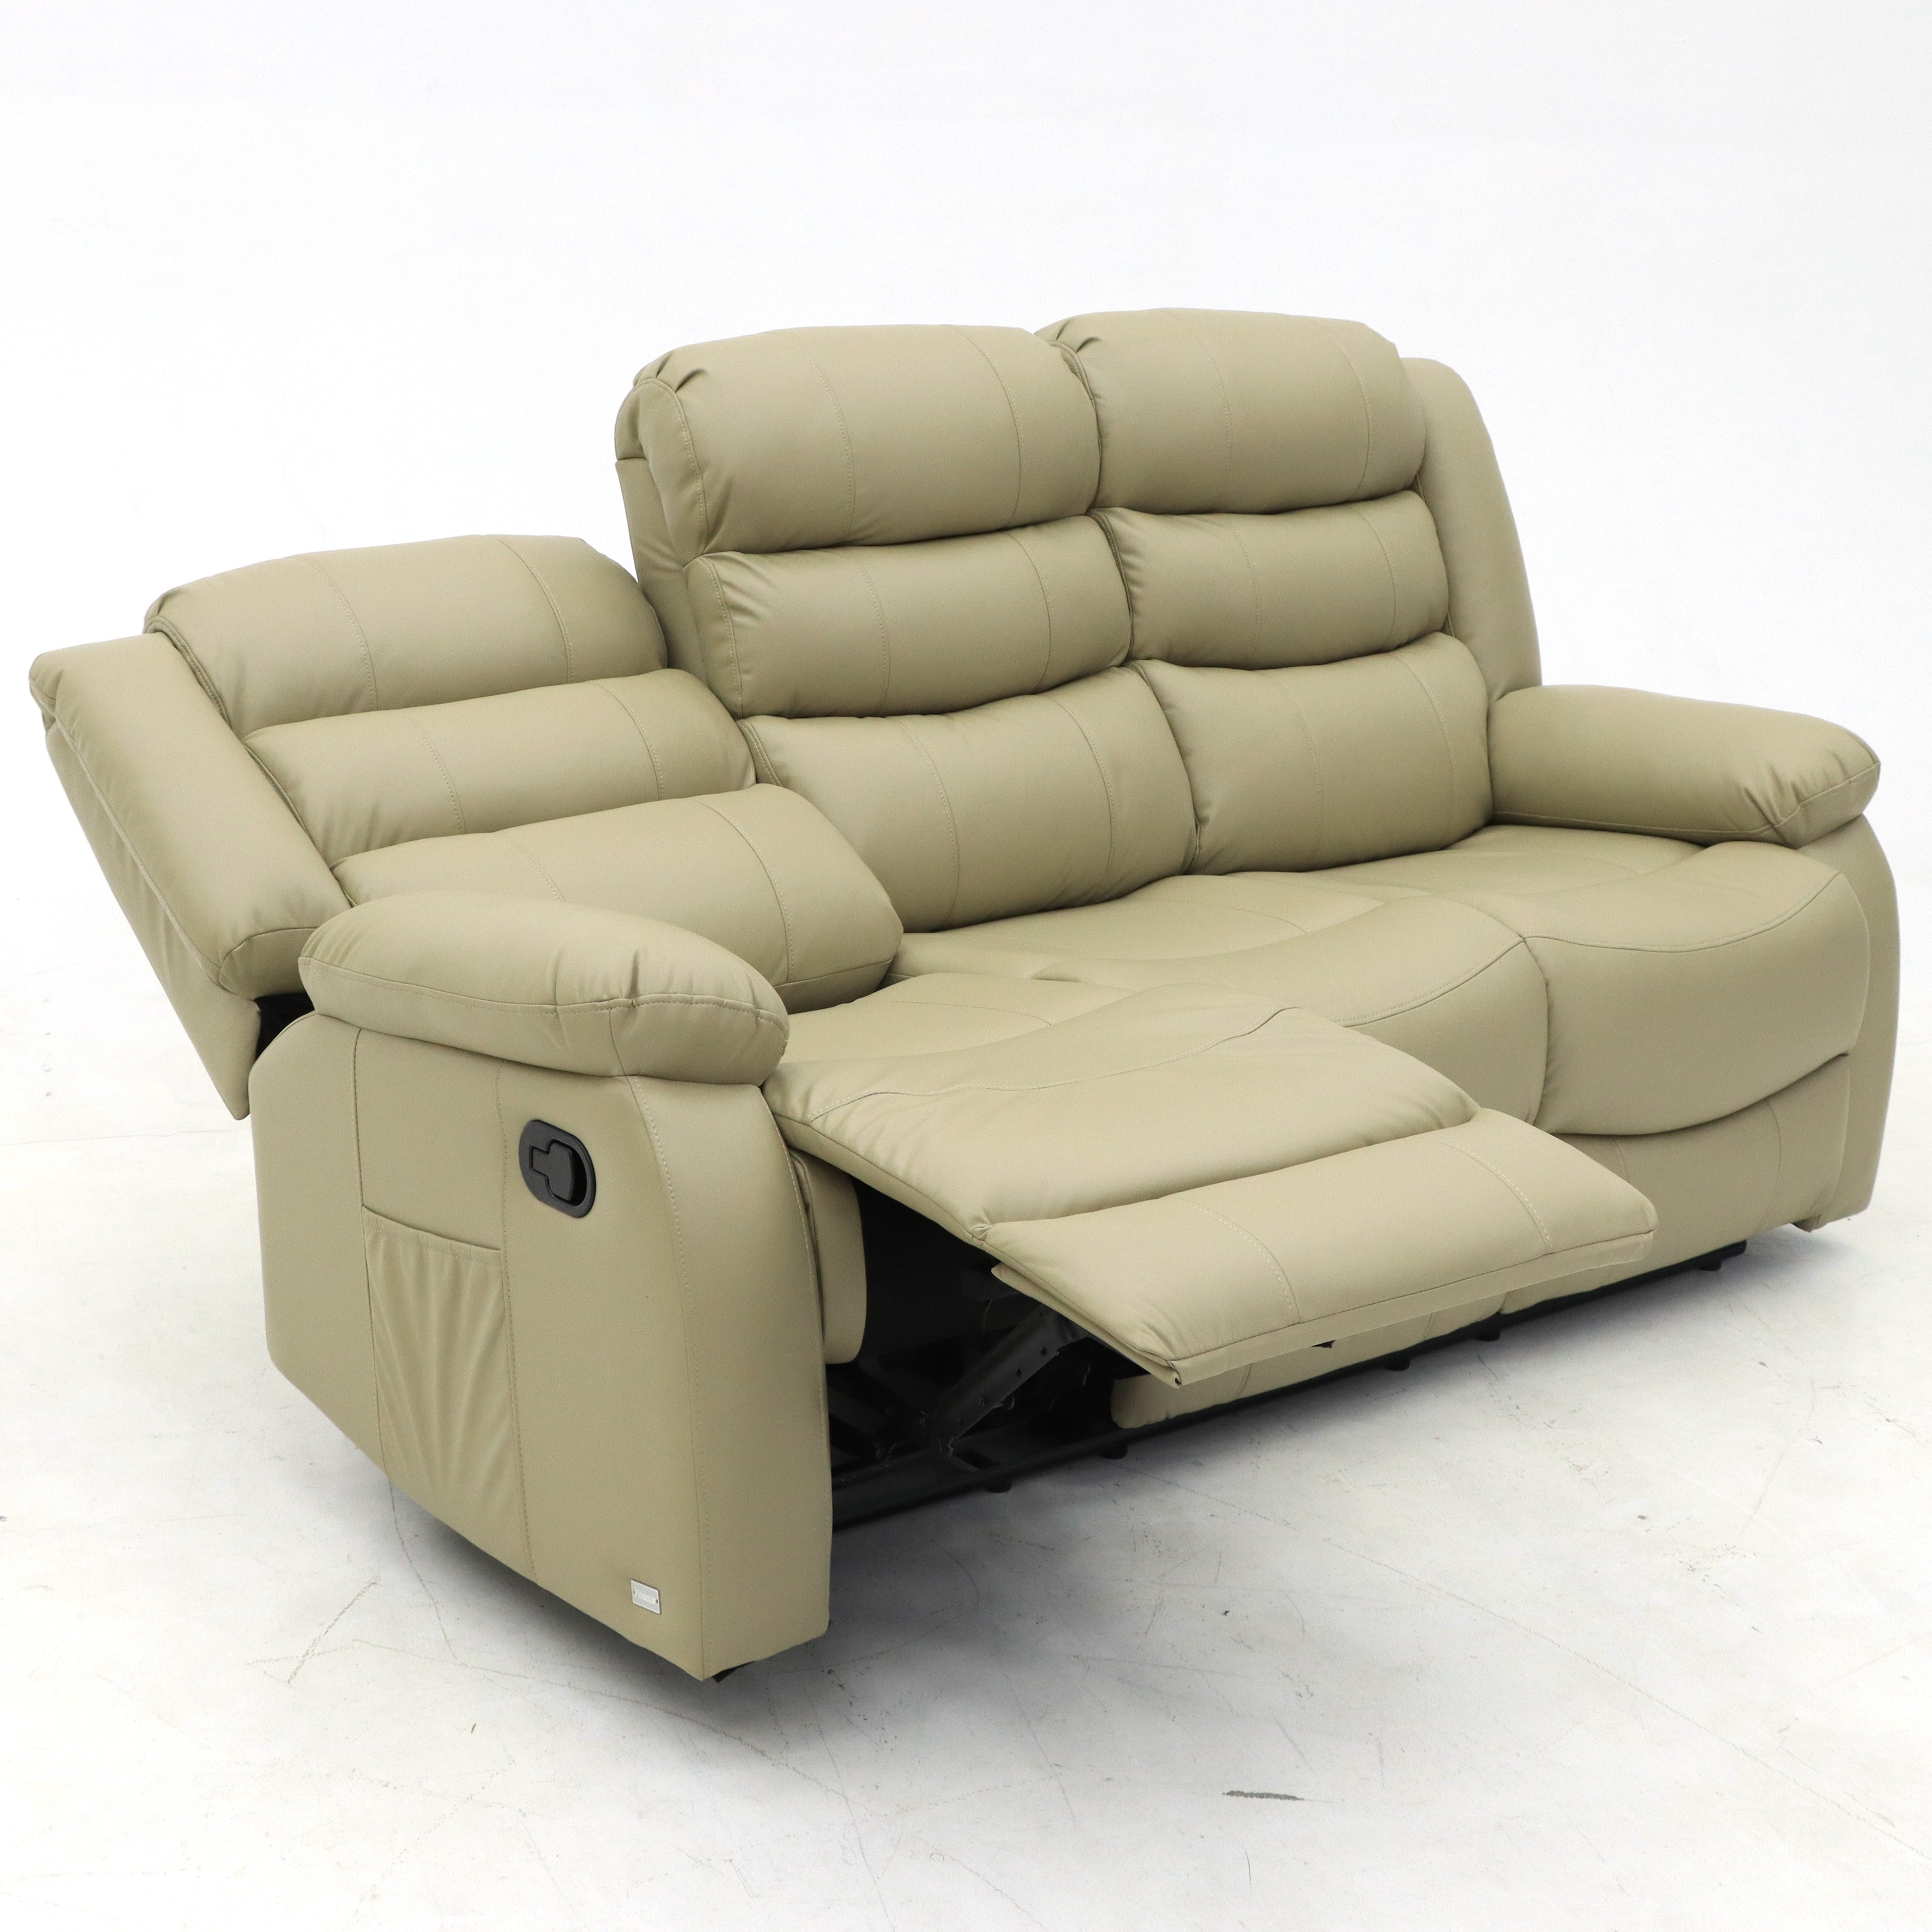 Augusta 3 Seater and 2 Seater Manual Recliner Cream Leather